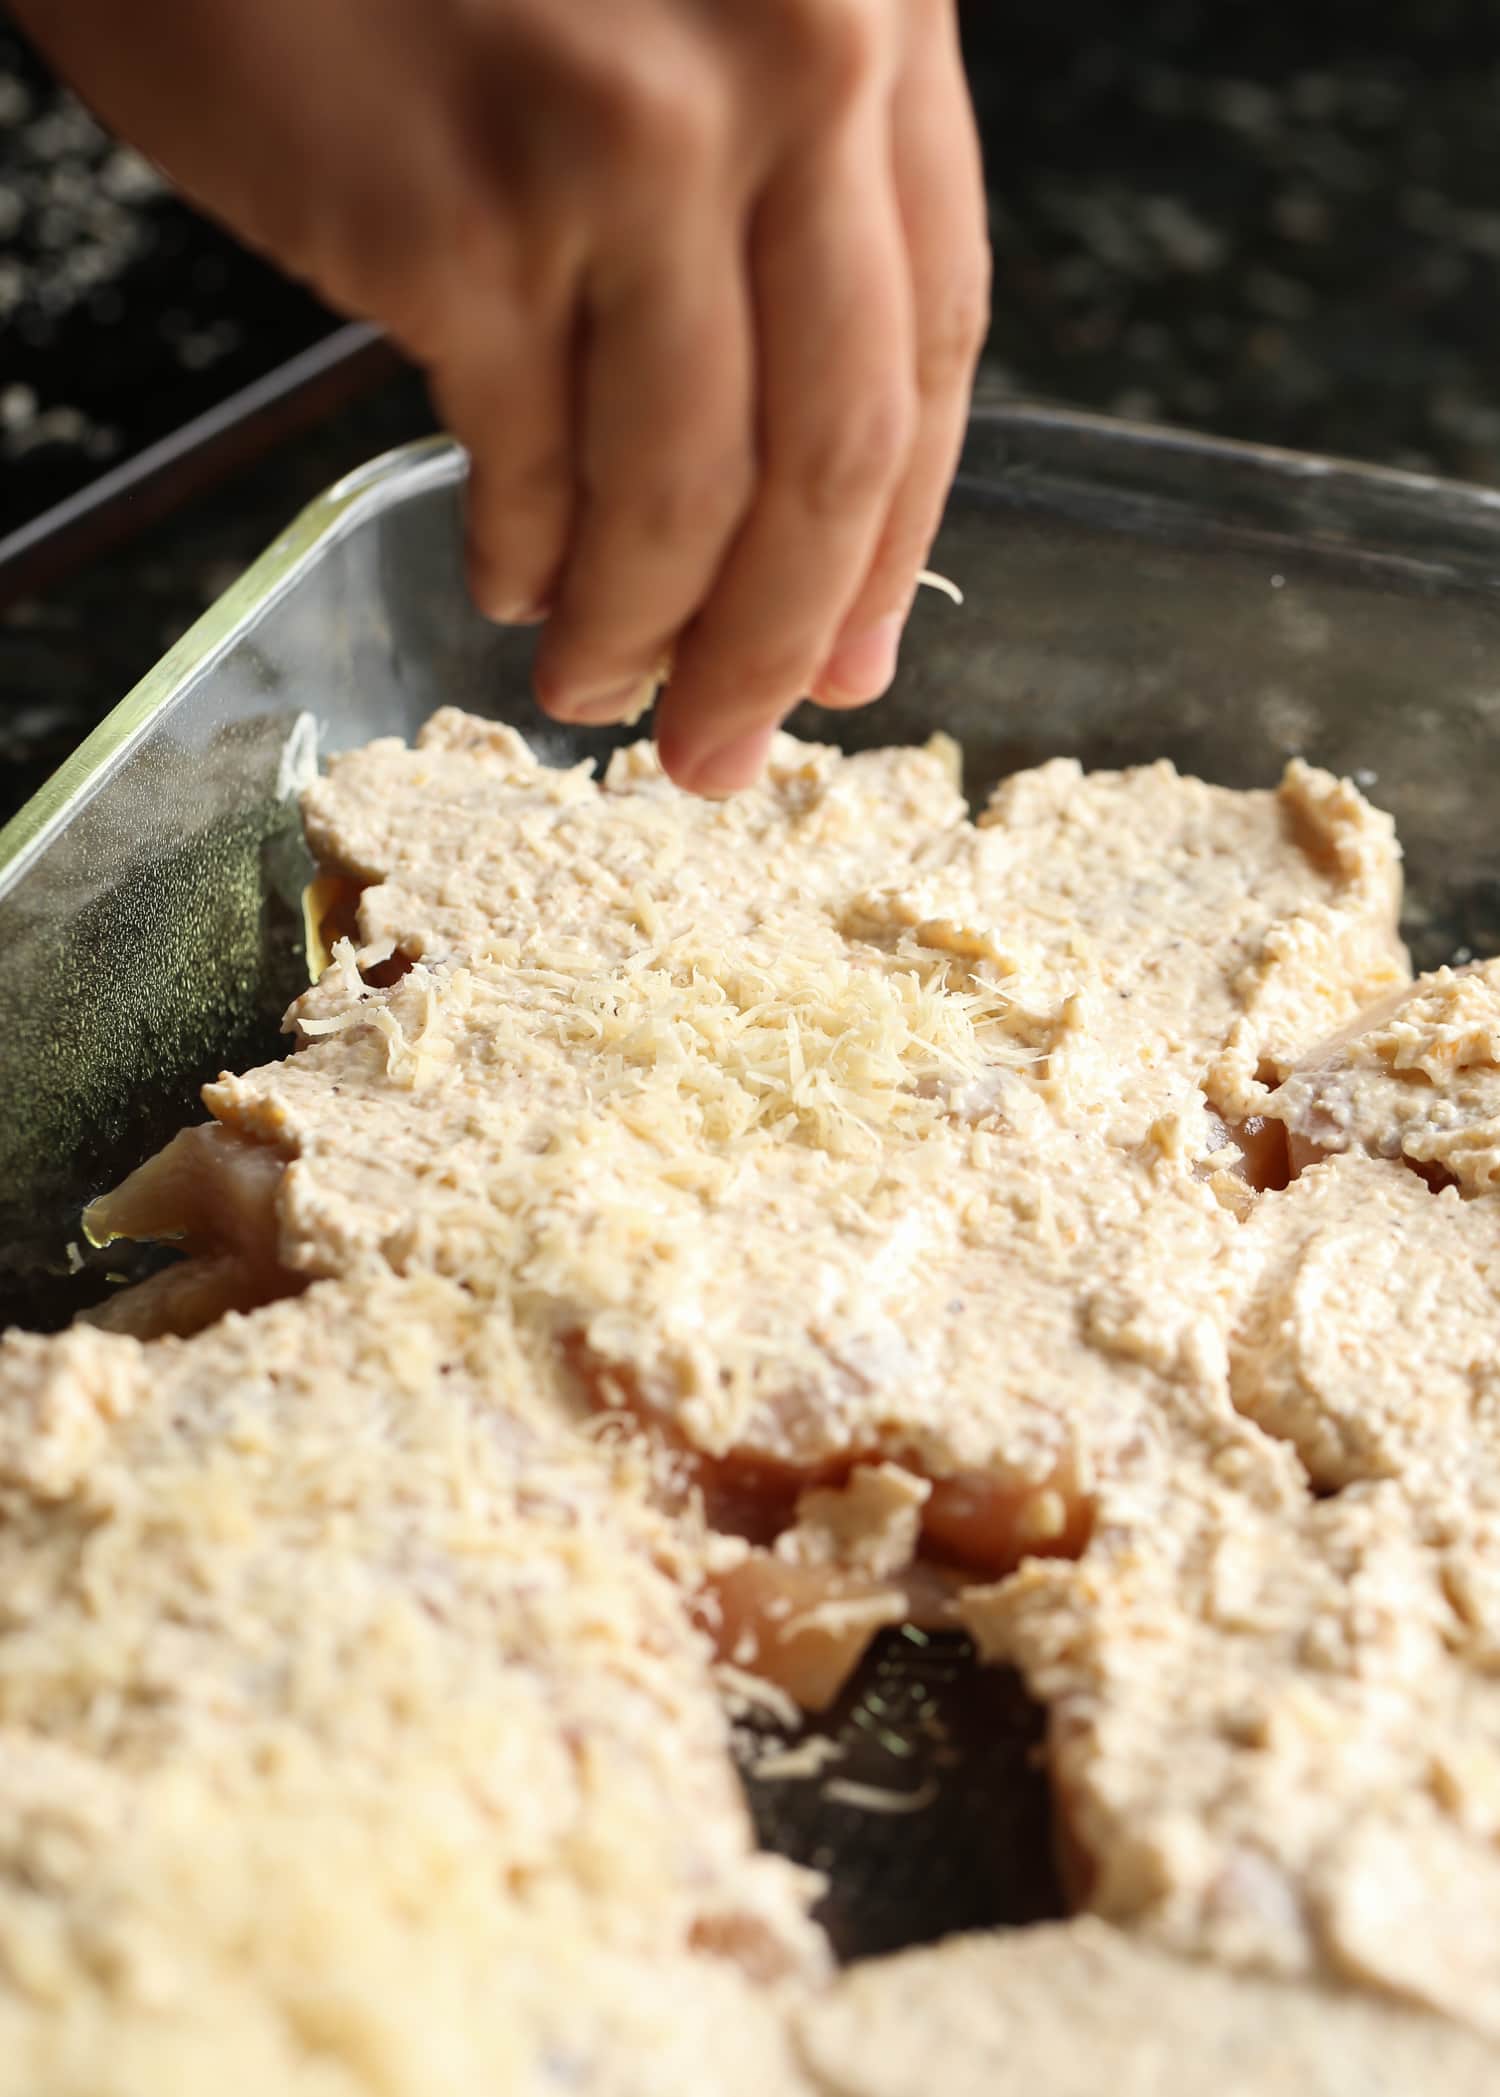 sprinkling parmesan cheese onto chicken breasts in a baking dish